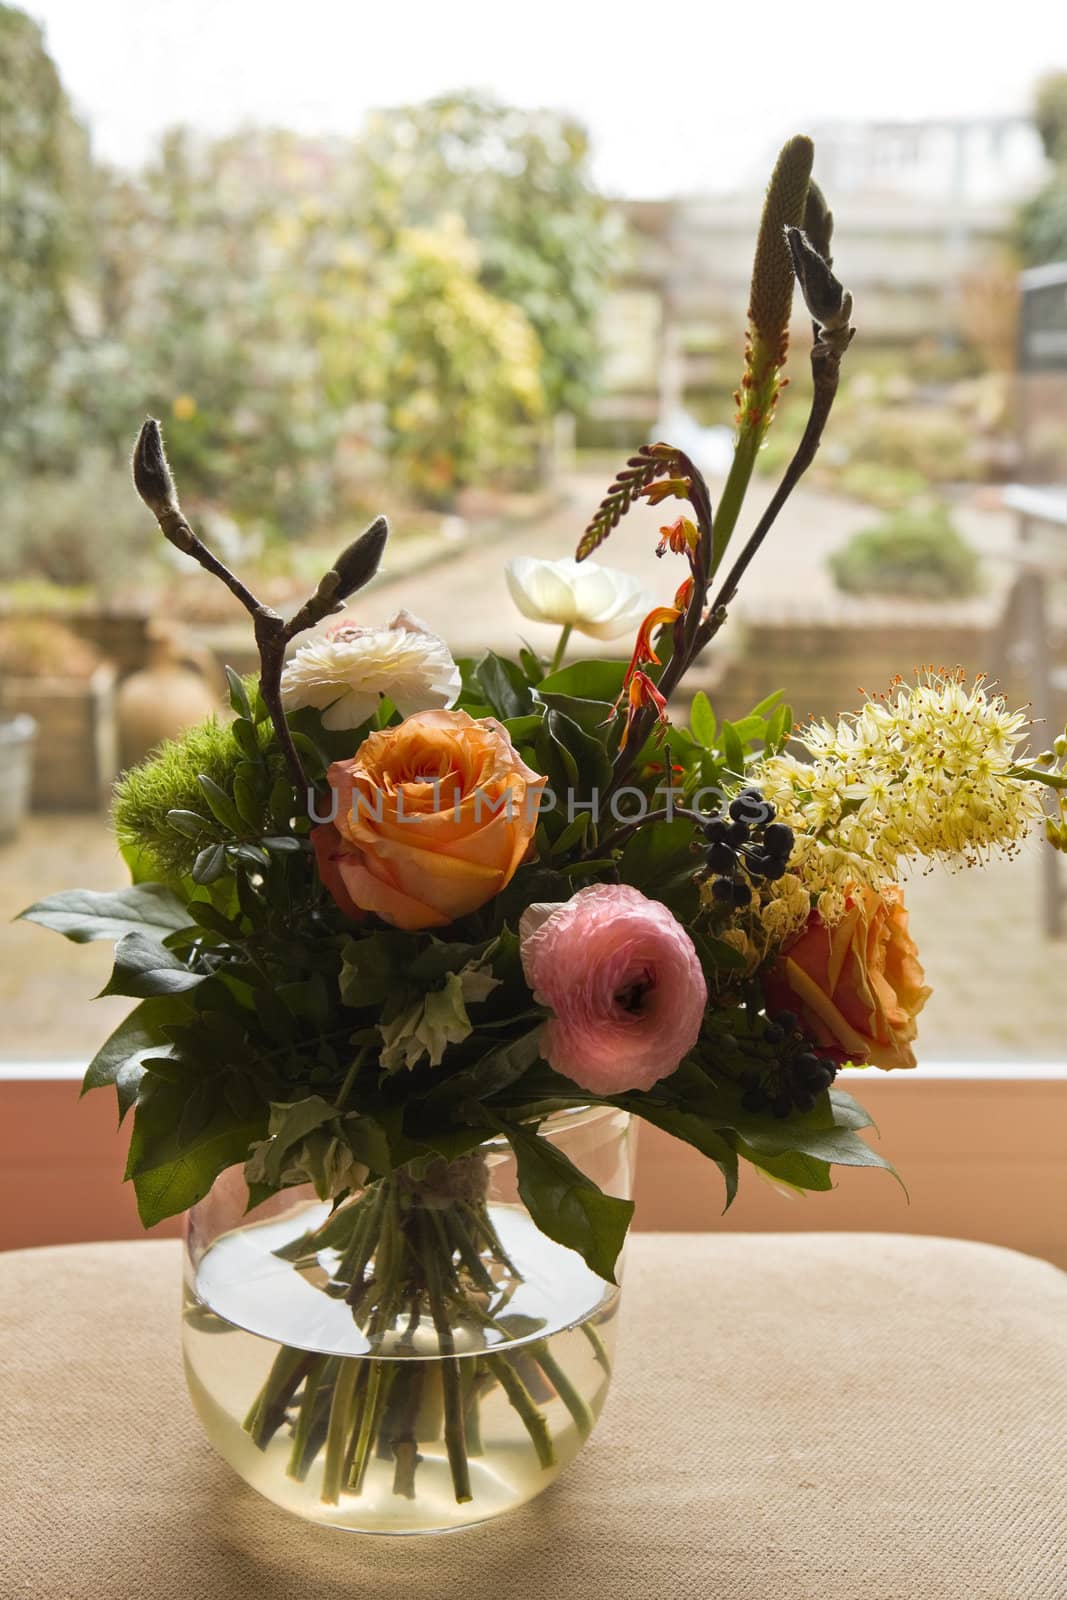 Bouquet of flowers in window with view to garden in background